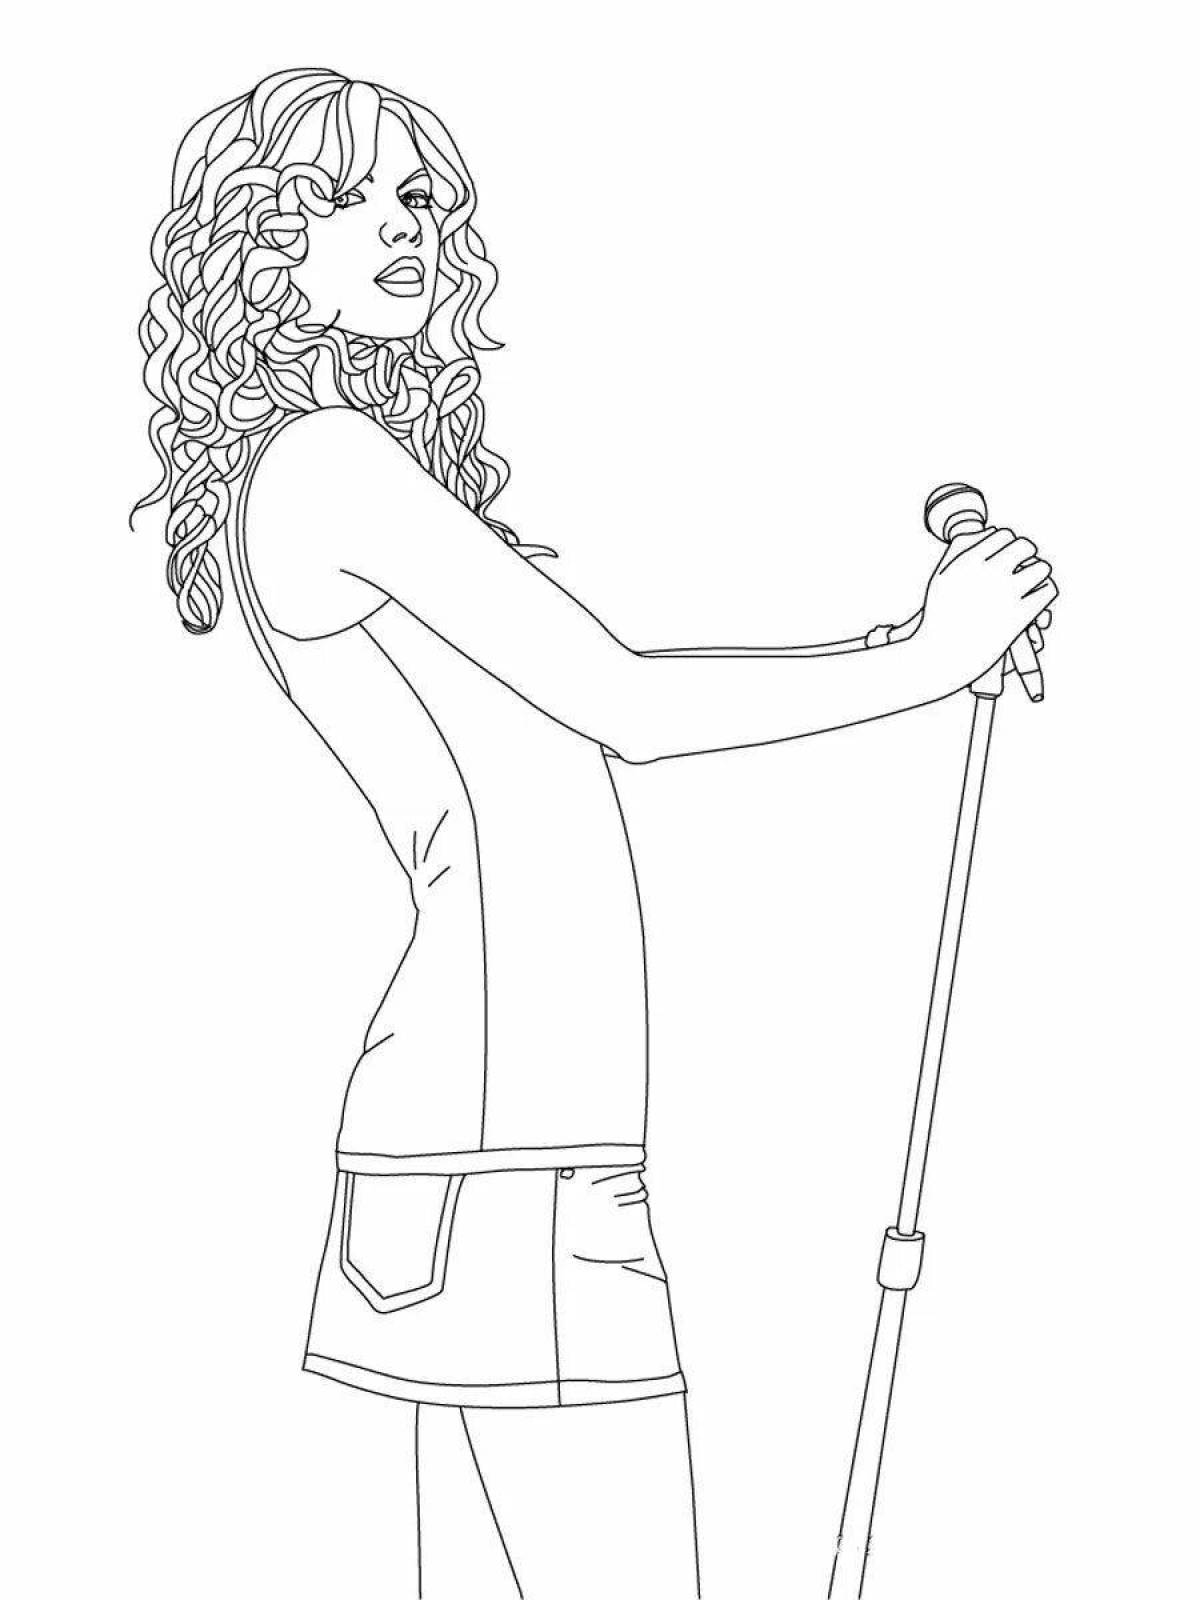 Singer glowing coloring page